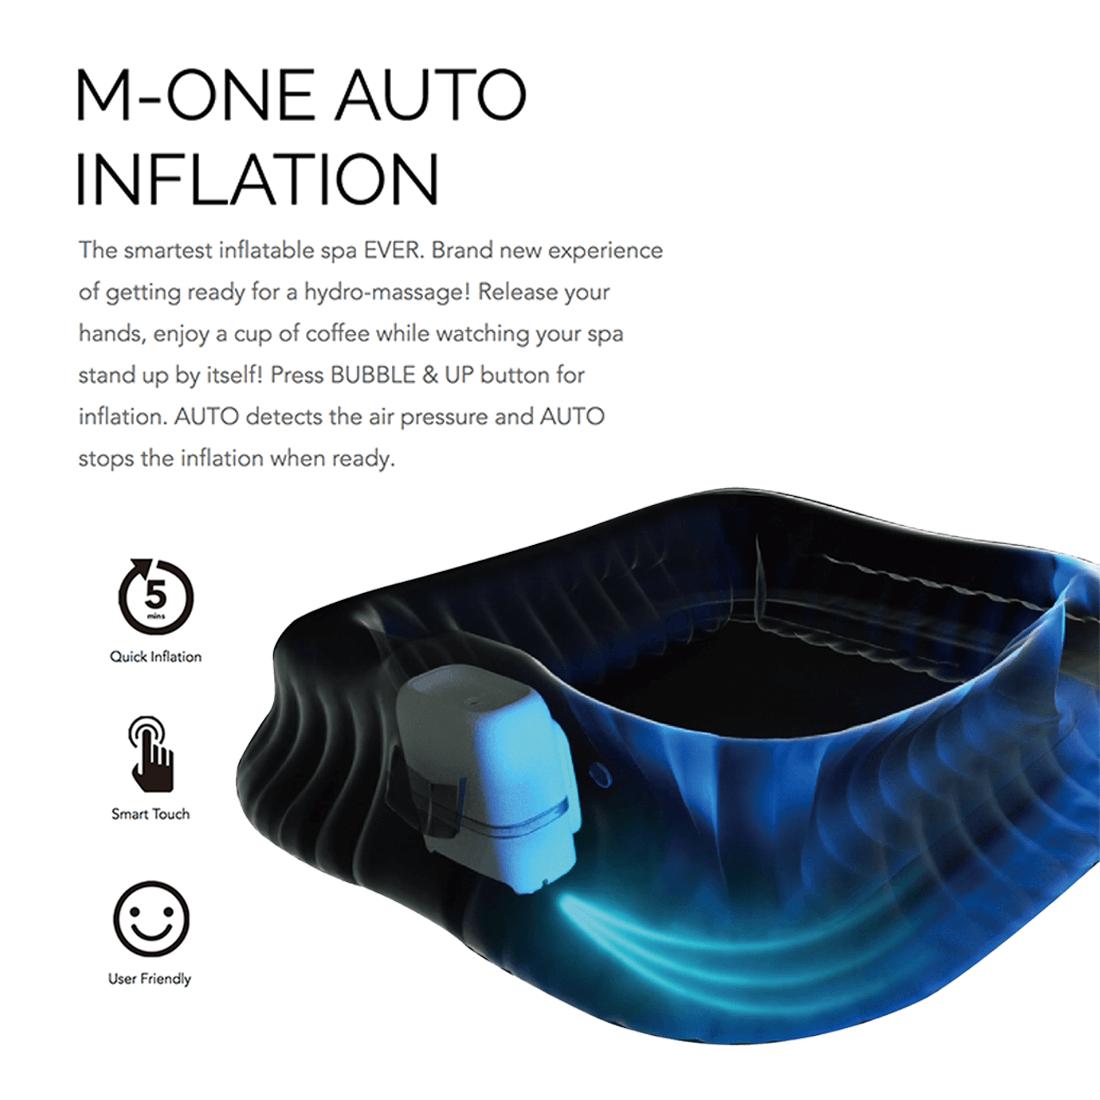 M-Spa 4-person Urban Series Mont Blanc, P-MB049 Auto Inflation